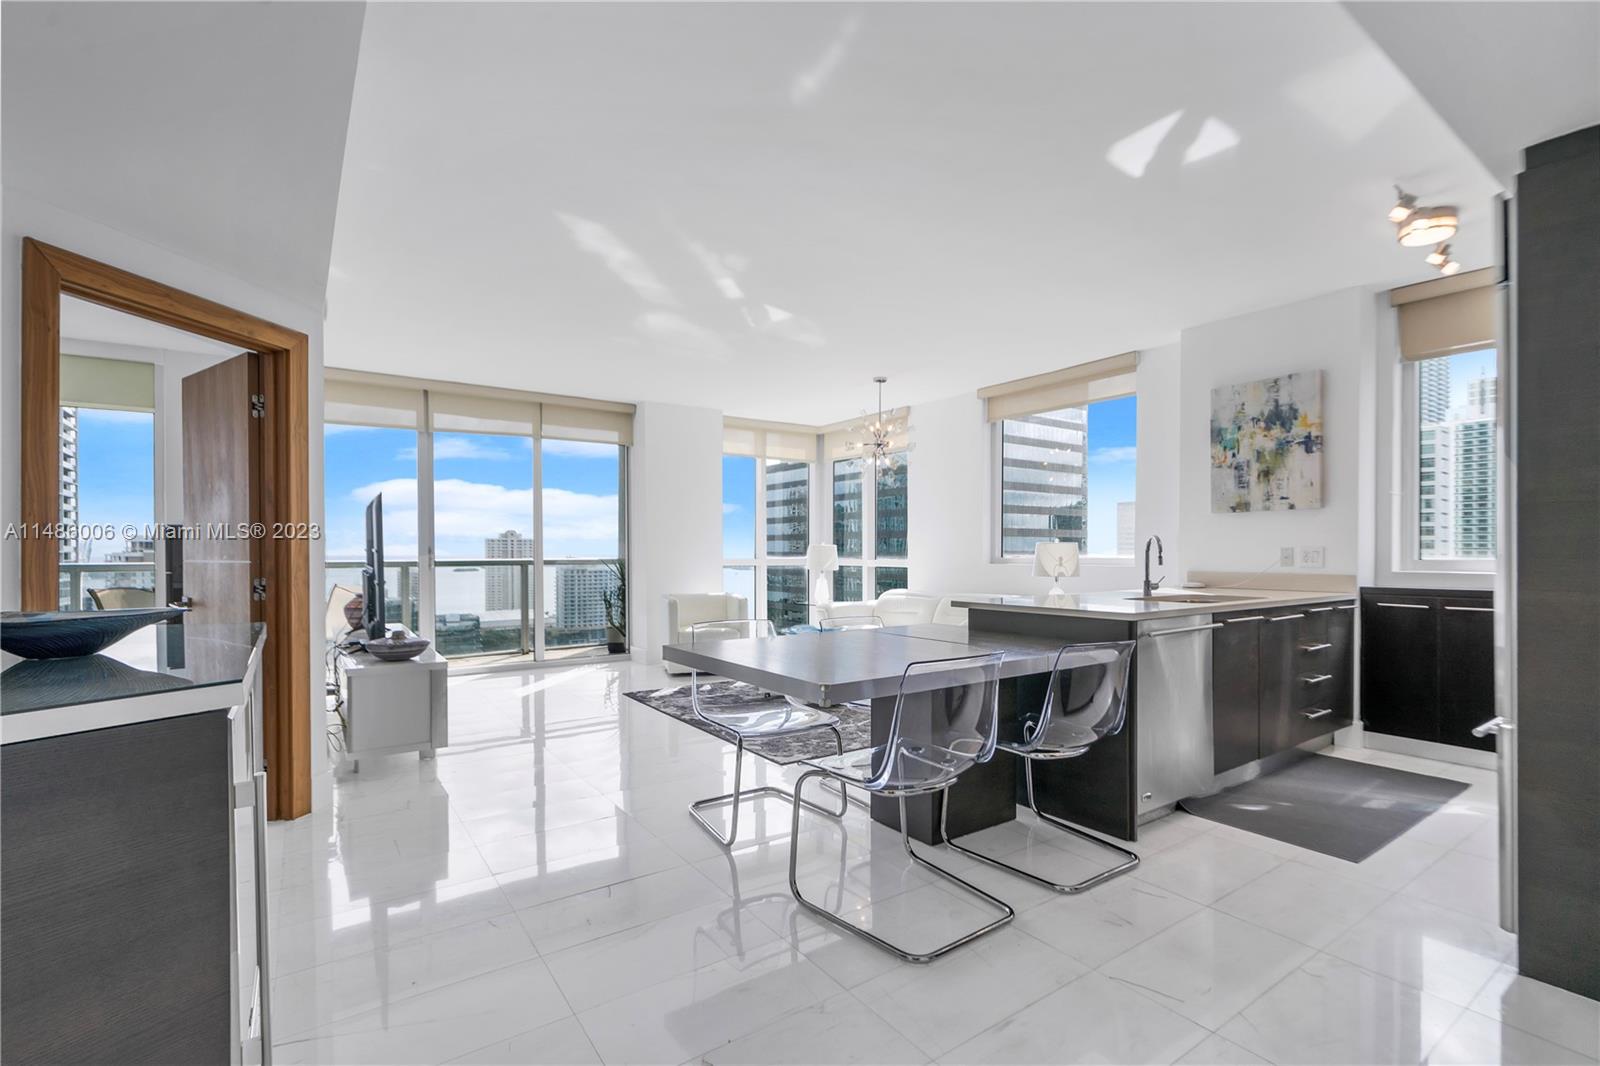 Introducing a luxurious 2/2 condo in the heart of Brickell Ave, boasting unparalleled elegance & breathtaking views. This sun-drenched haven features floor-to-ceiling windows showcasing stunning vistas of the bay & ocean horizon.
The residence comes replete modern finishes & exquisite amenities, including a captivating rooftop pool adorned with day beds overlooking the city's skyline. Additionally, a 11th-floor pool with cabanas, a chic lounge area, & a cutting-edge private gym. Convenience meets sophistication with valet services, EV charging stations, a spa for both him & her, ensuring a pampering experience. Don't miss this opportunity to own a slice of paradise harmonizing panoramic views, lavish amenities, & an unbeatable location in the heart of Brickell Ave's finest offerings.